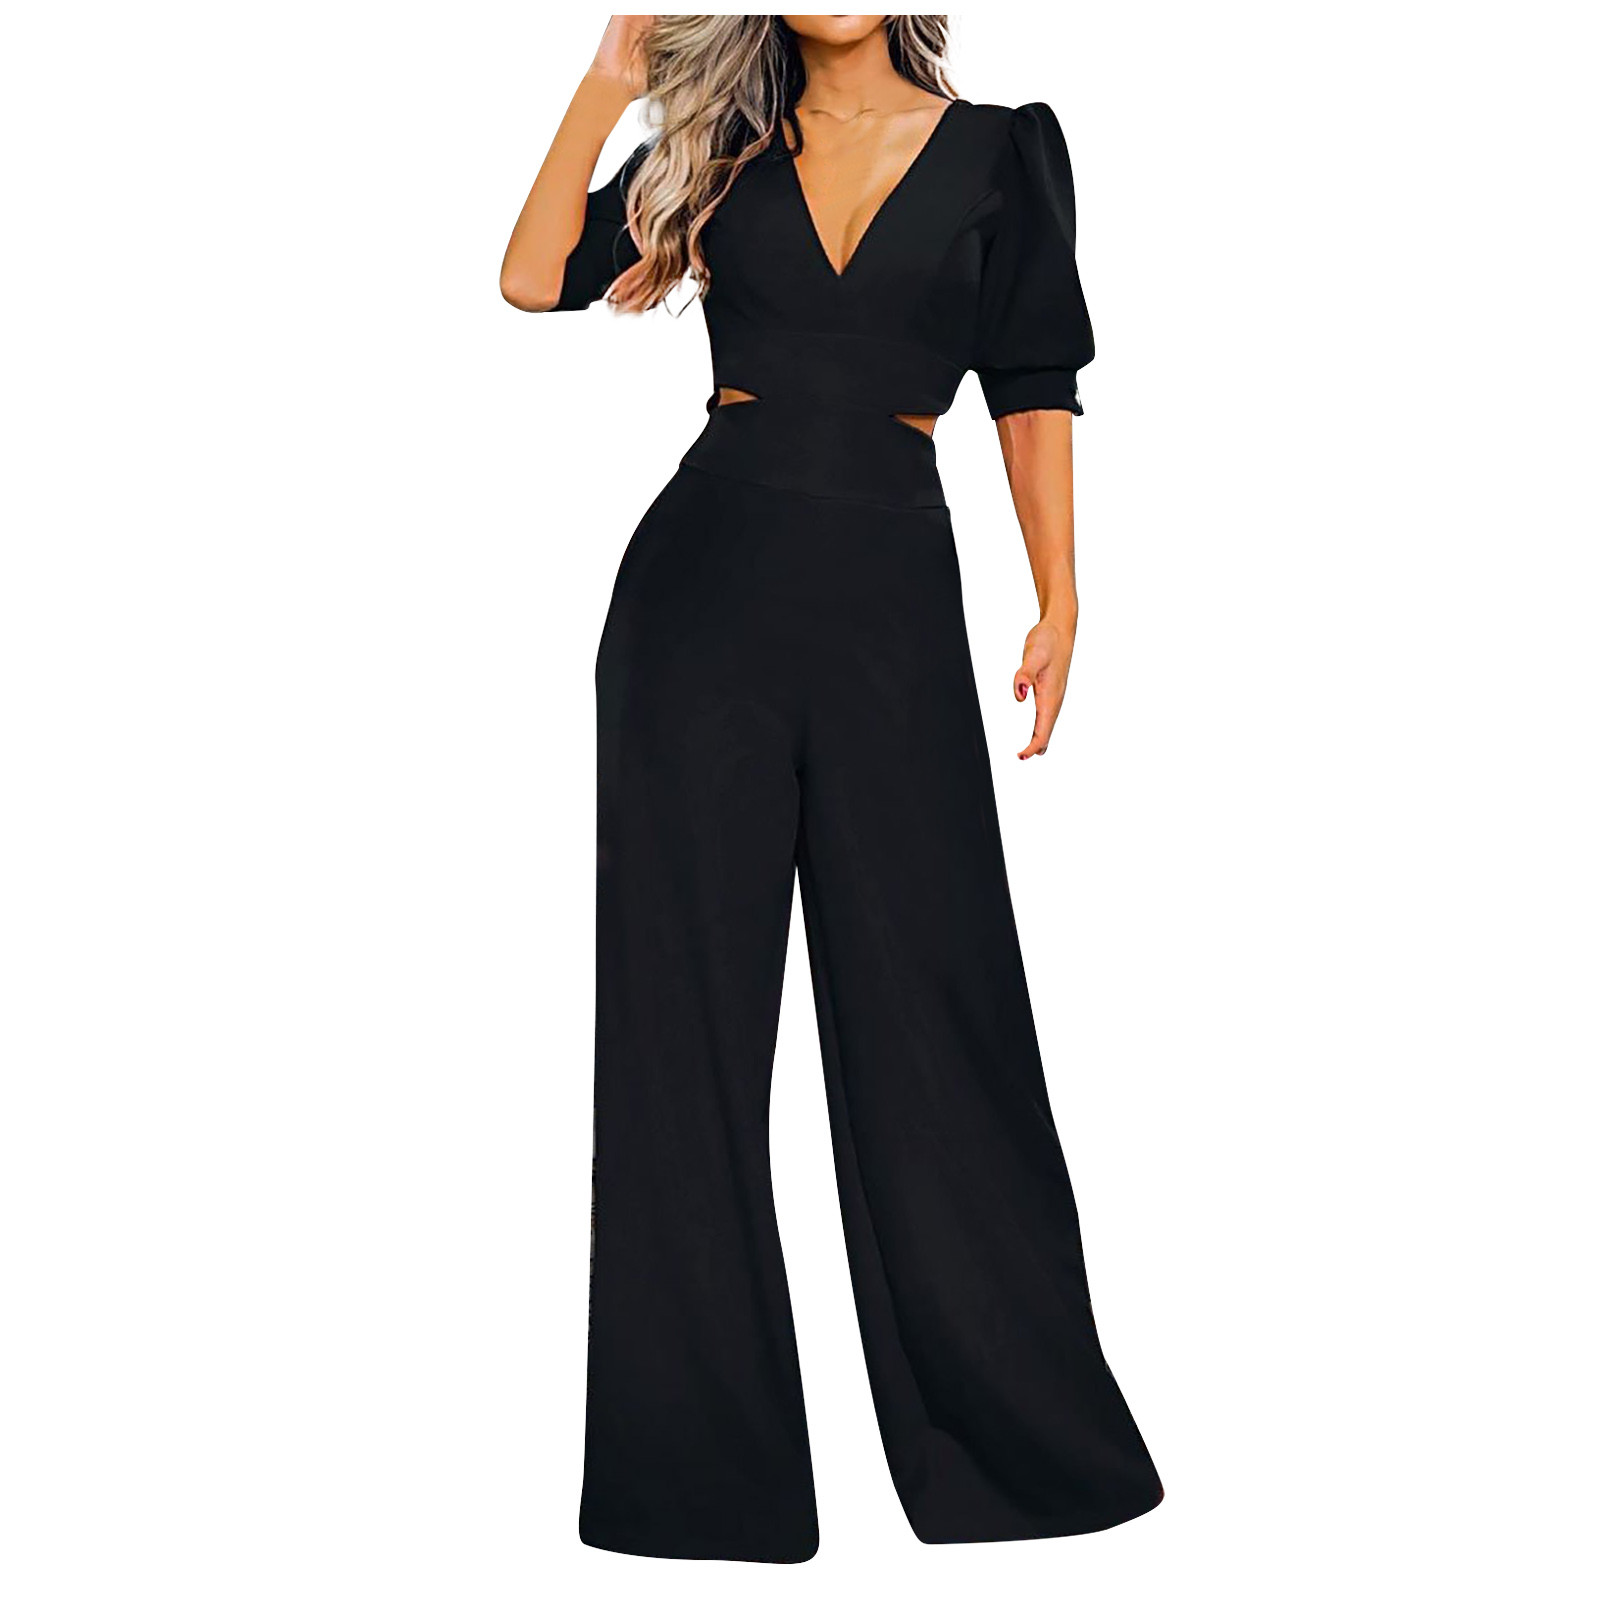 Dressy Jumpsuits Womens One Piece Short Sleeve Long Rompers Overall Cut Out  V Neck Wide Leg Work Dress Jumpsuit (Small, Black) 